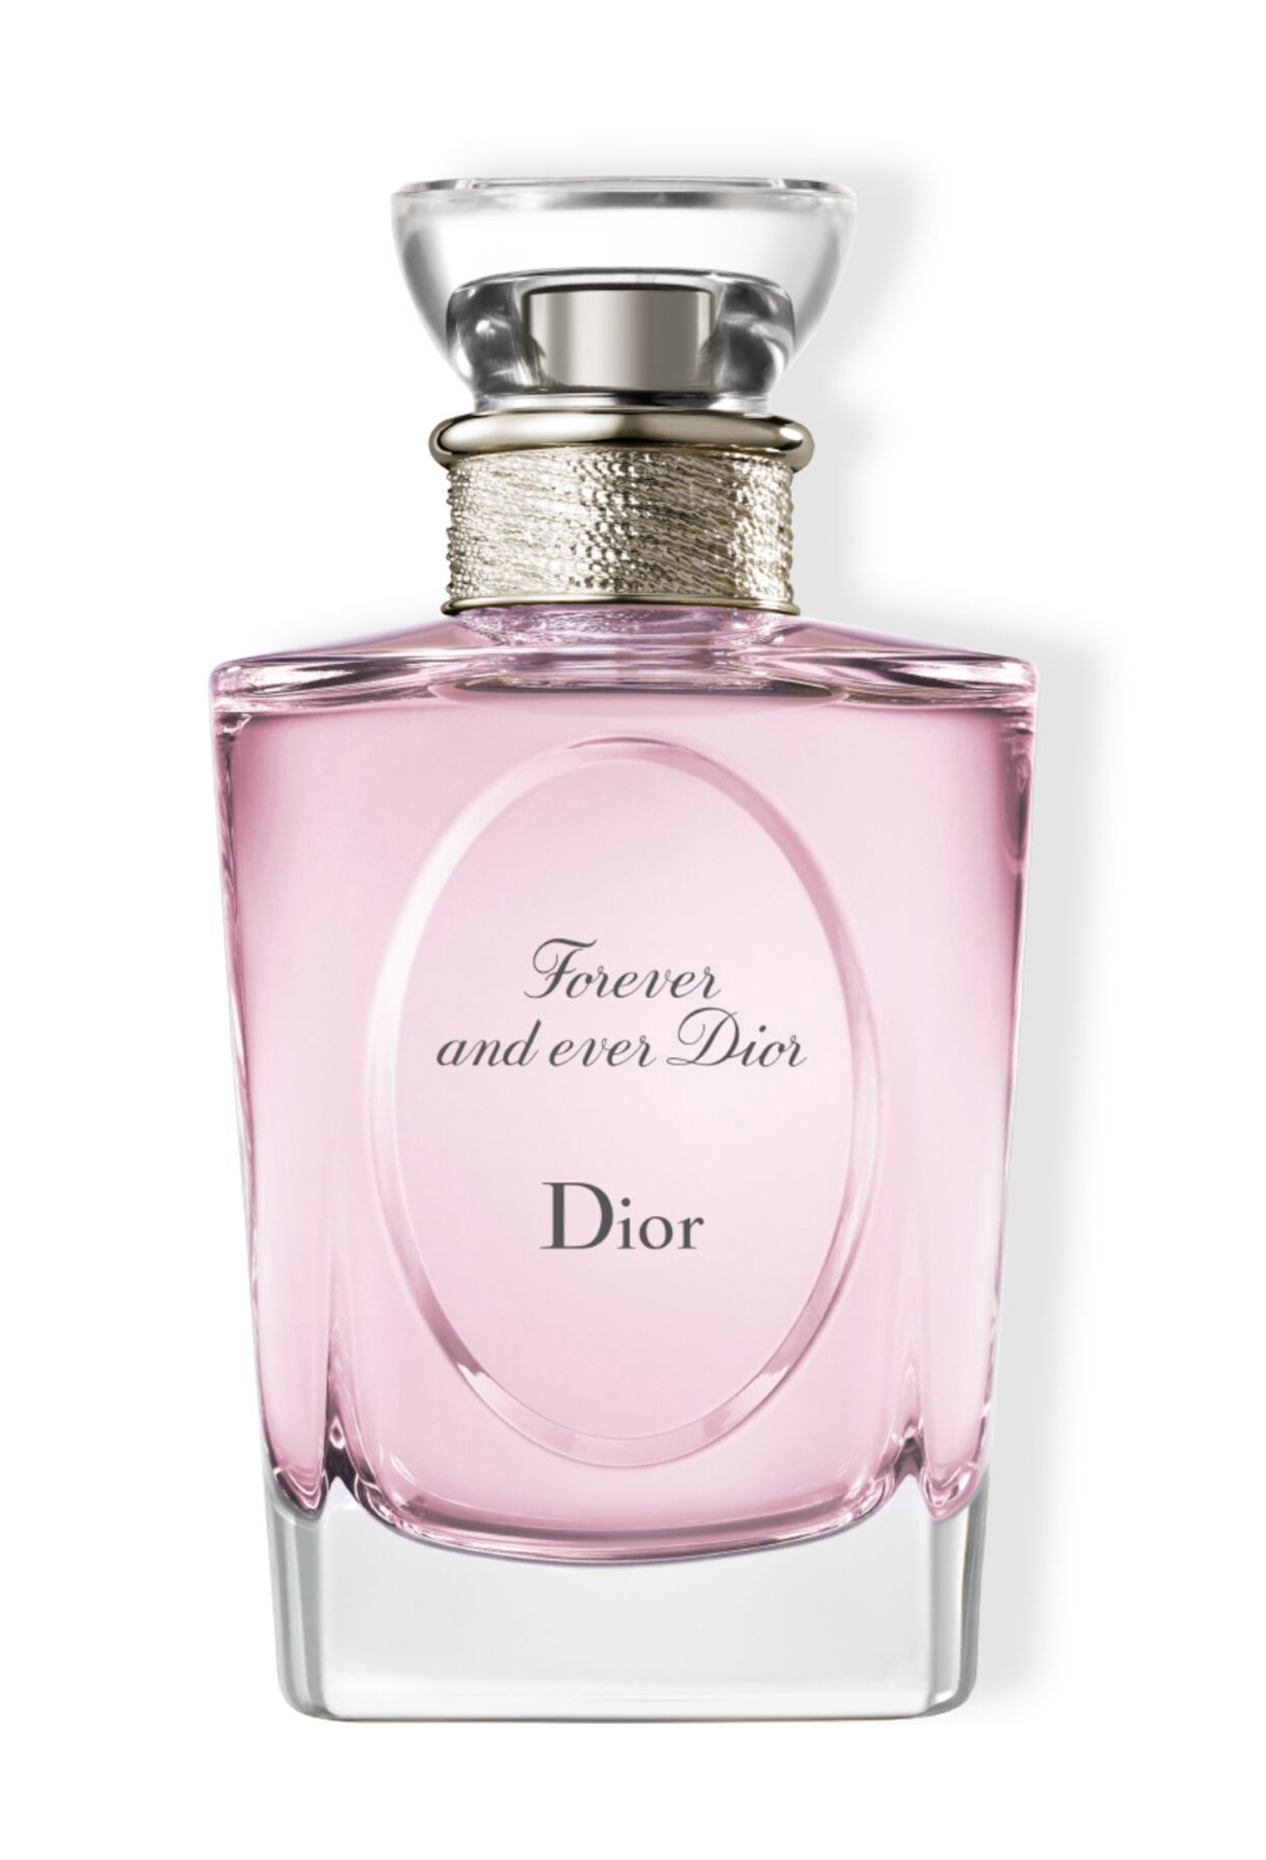 Туалетная вода Dior Forever And Ever, 100 мл dior туалетная вода forever and ever 2009 100 мл